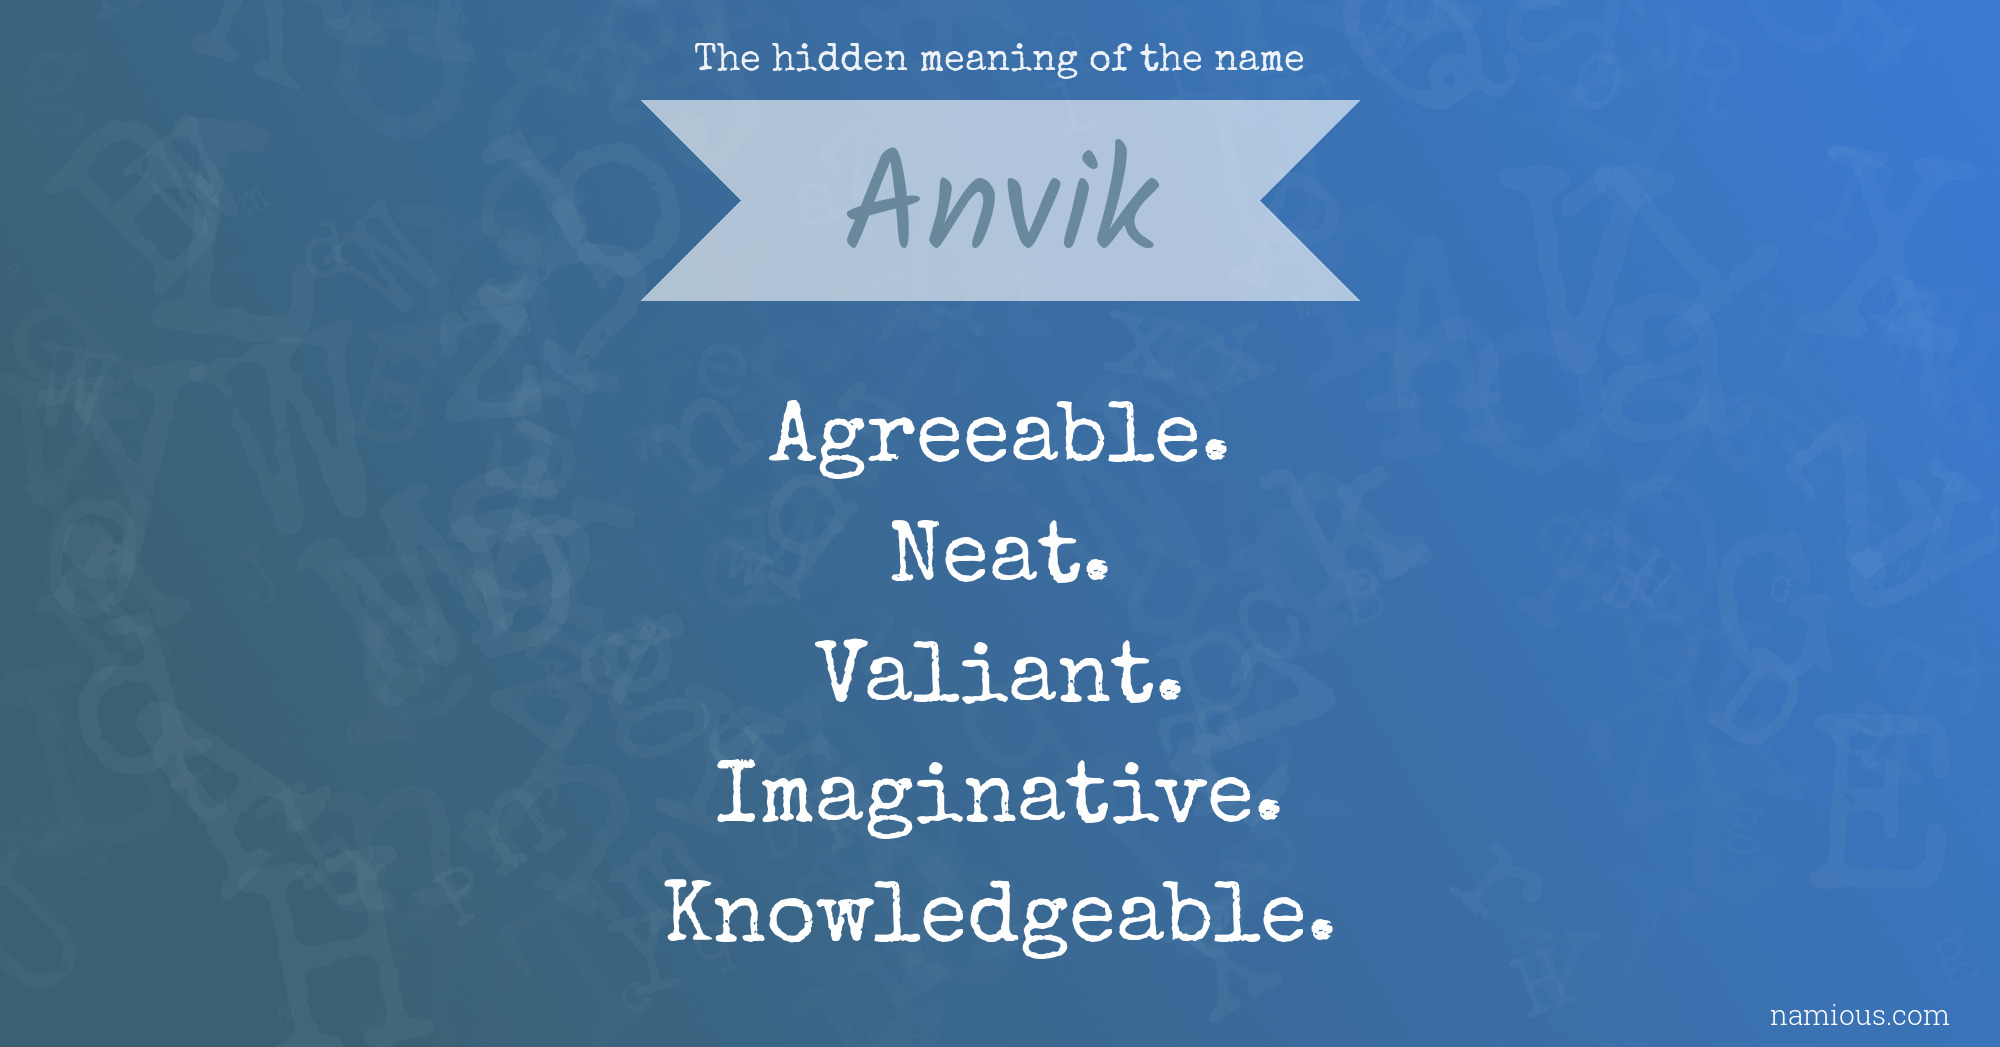 The hidden meaning of the name Anvik